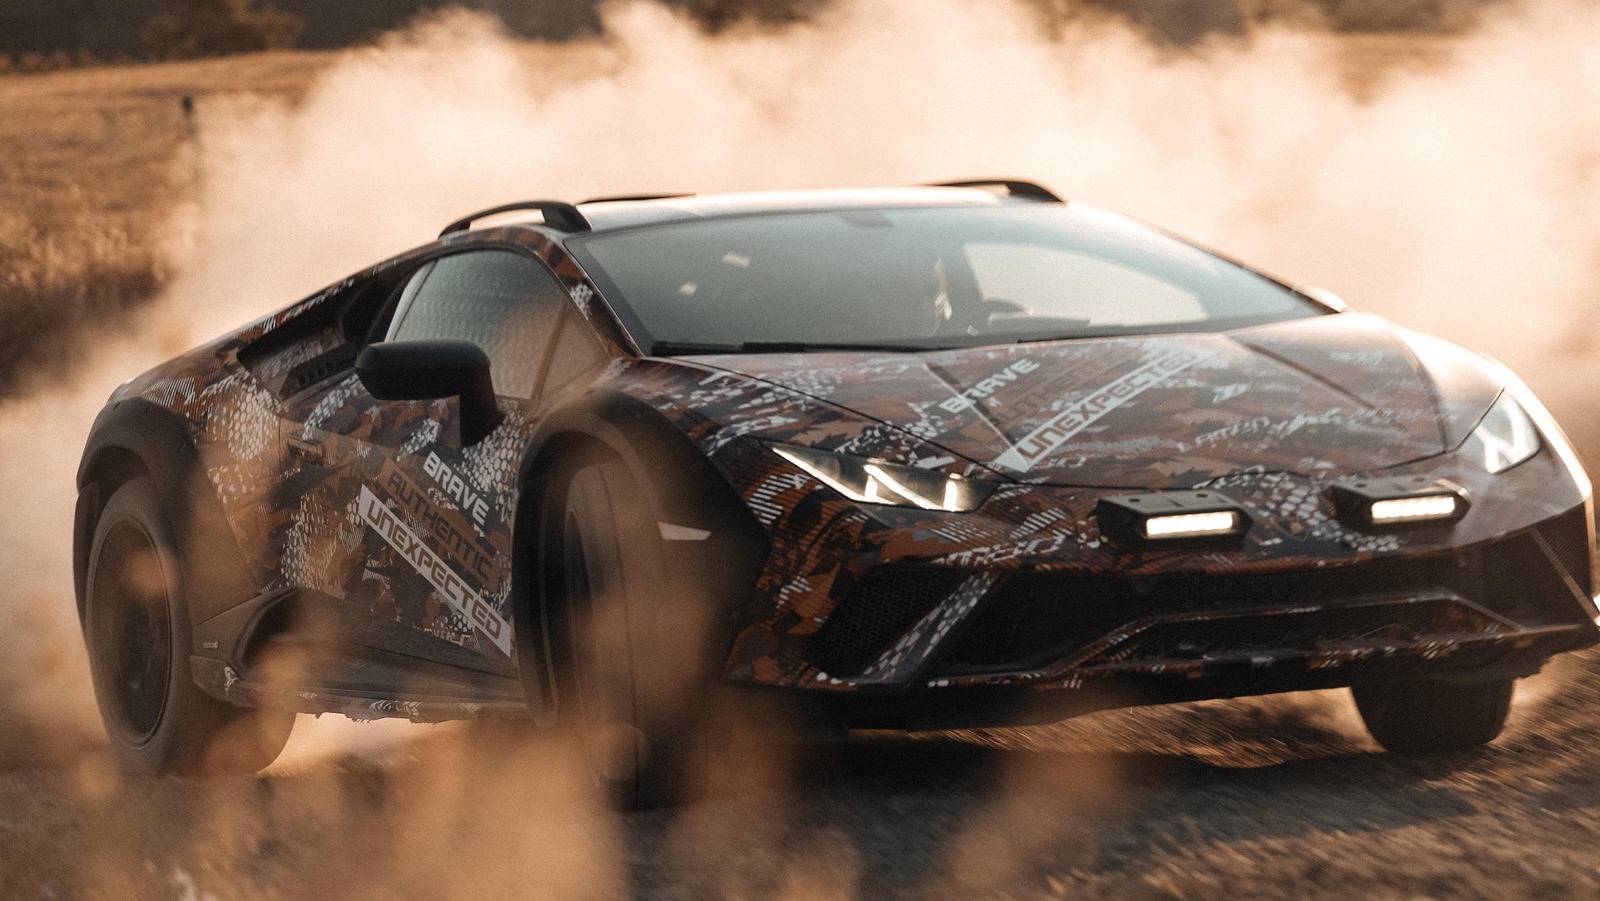 Lamborghini Built Its Outrageous Huracán Sterrato Off-Road Supercar And The Result Is Wild